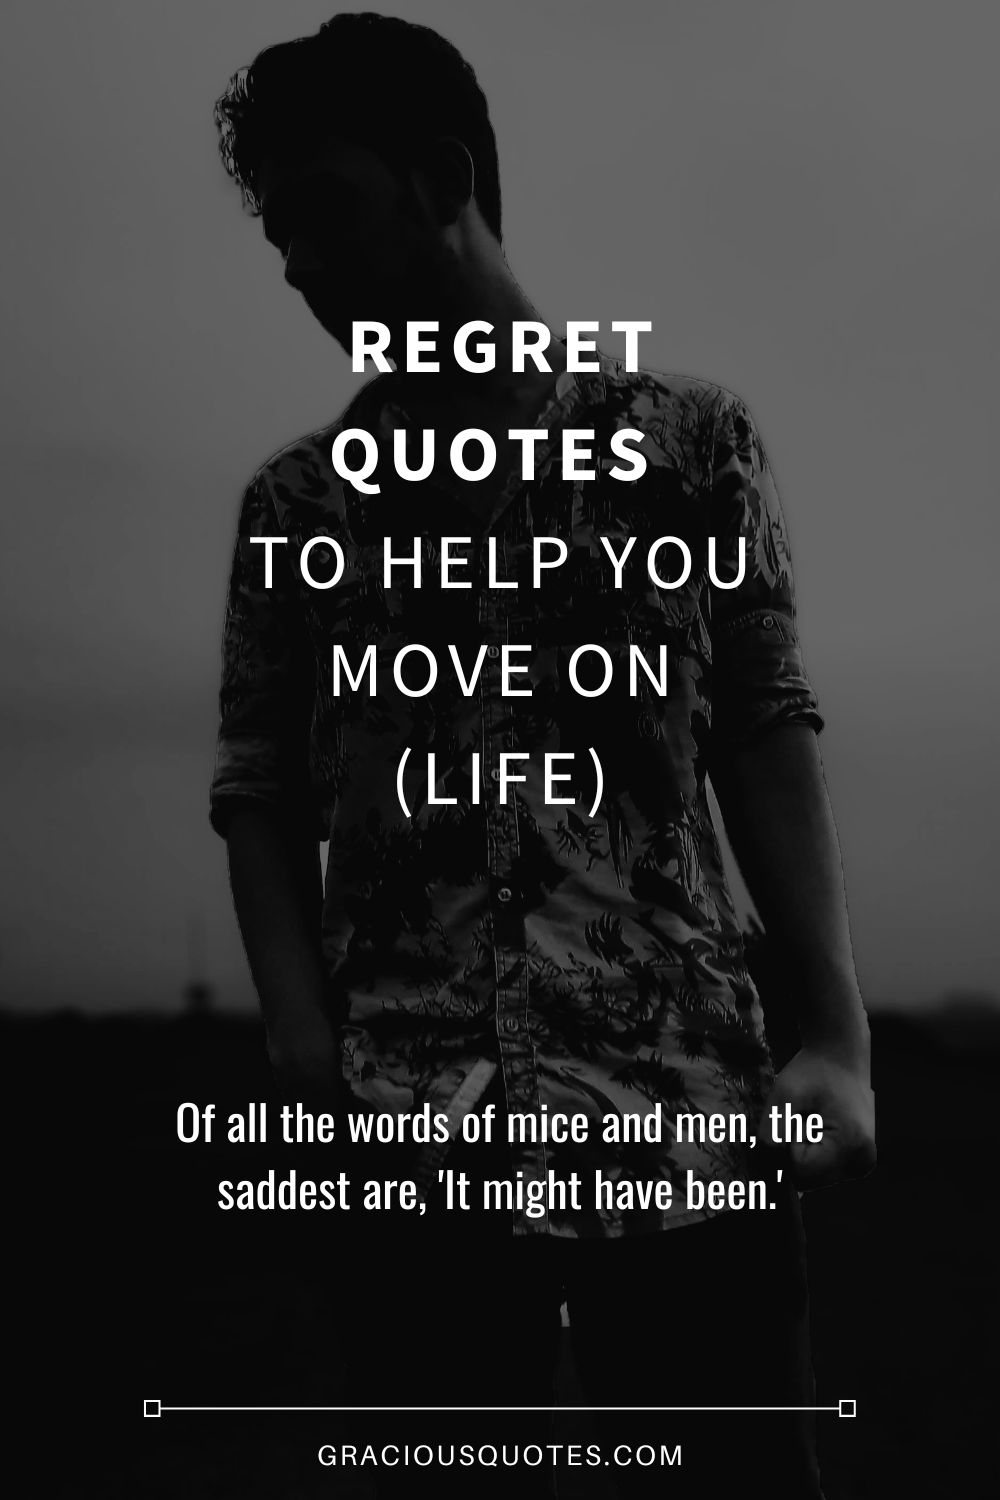 115 Regret Quotes To Help You Forget (And Move Forward)